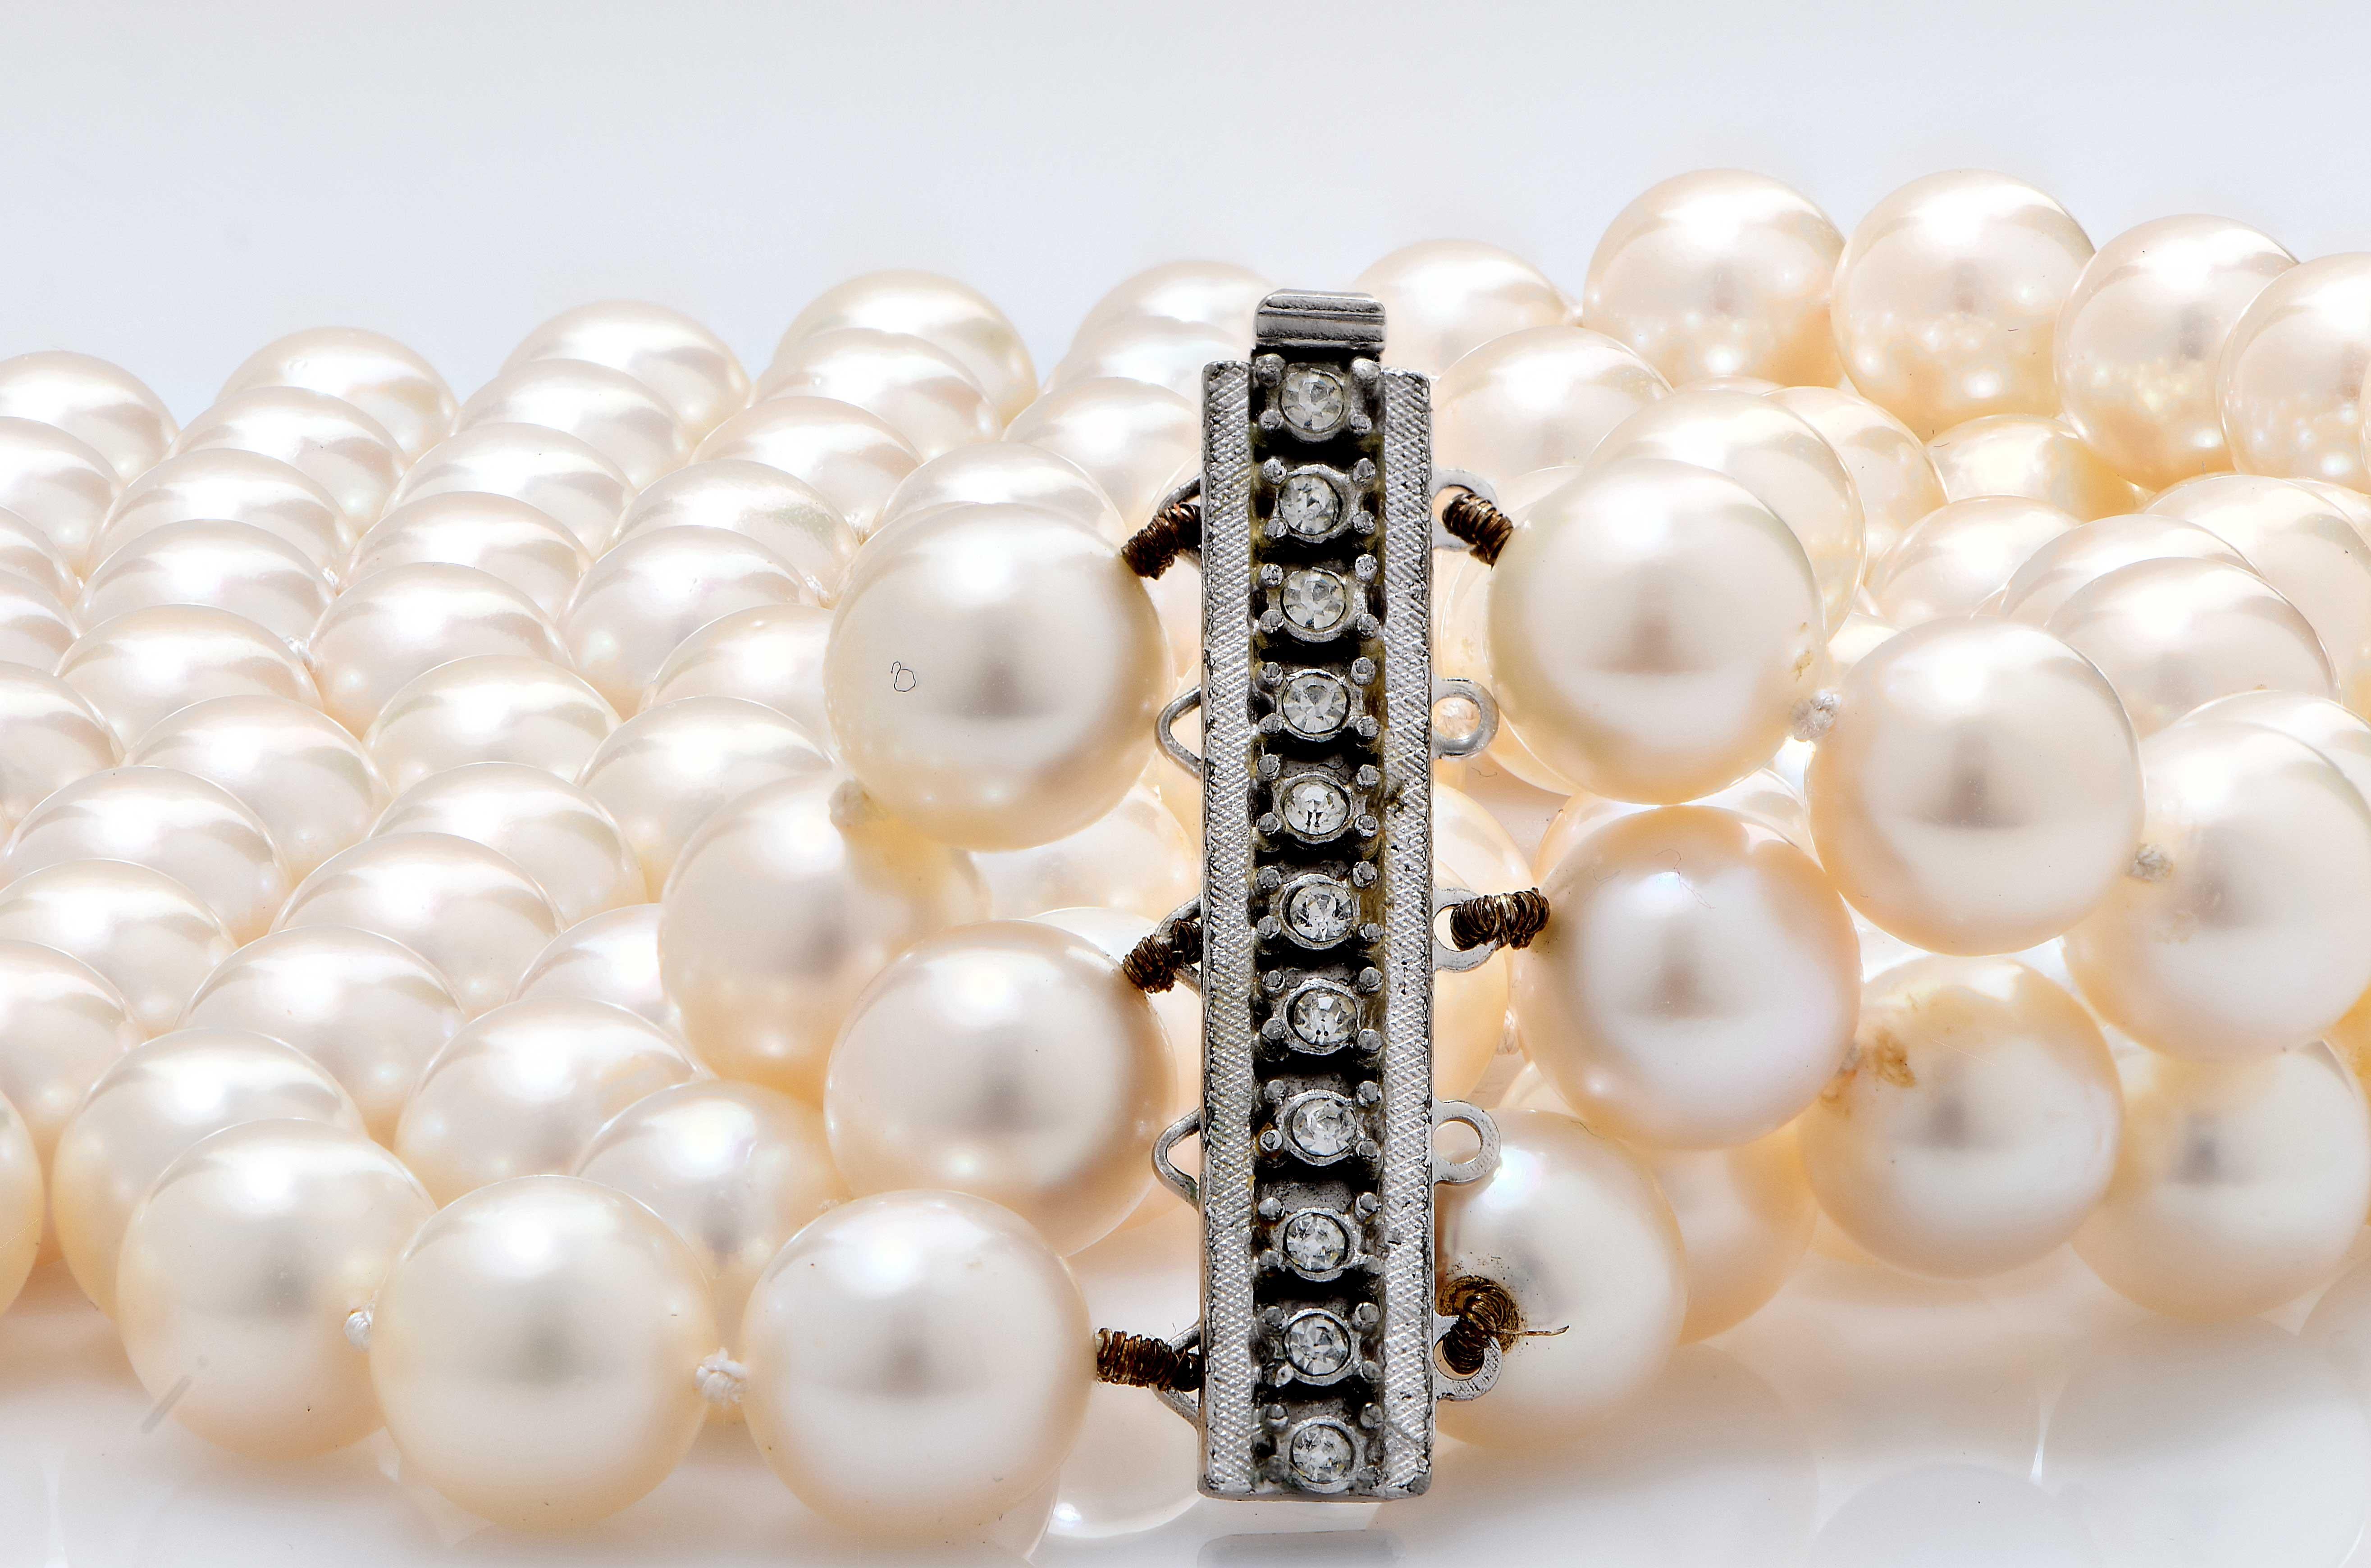 Beautiful Akoya Culured Pearl Necklace featuring three rows of 9mm pearls with each row measuring 19,20 and 22 inches accordingly. With a vintage clasp with diamonds. These pearls are from the 1970's and have very thick nacre which gives them a